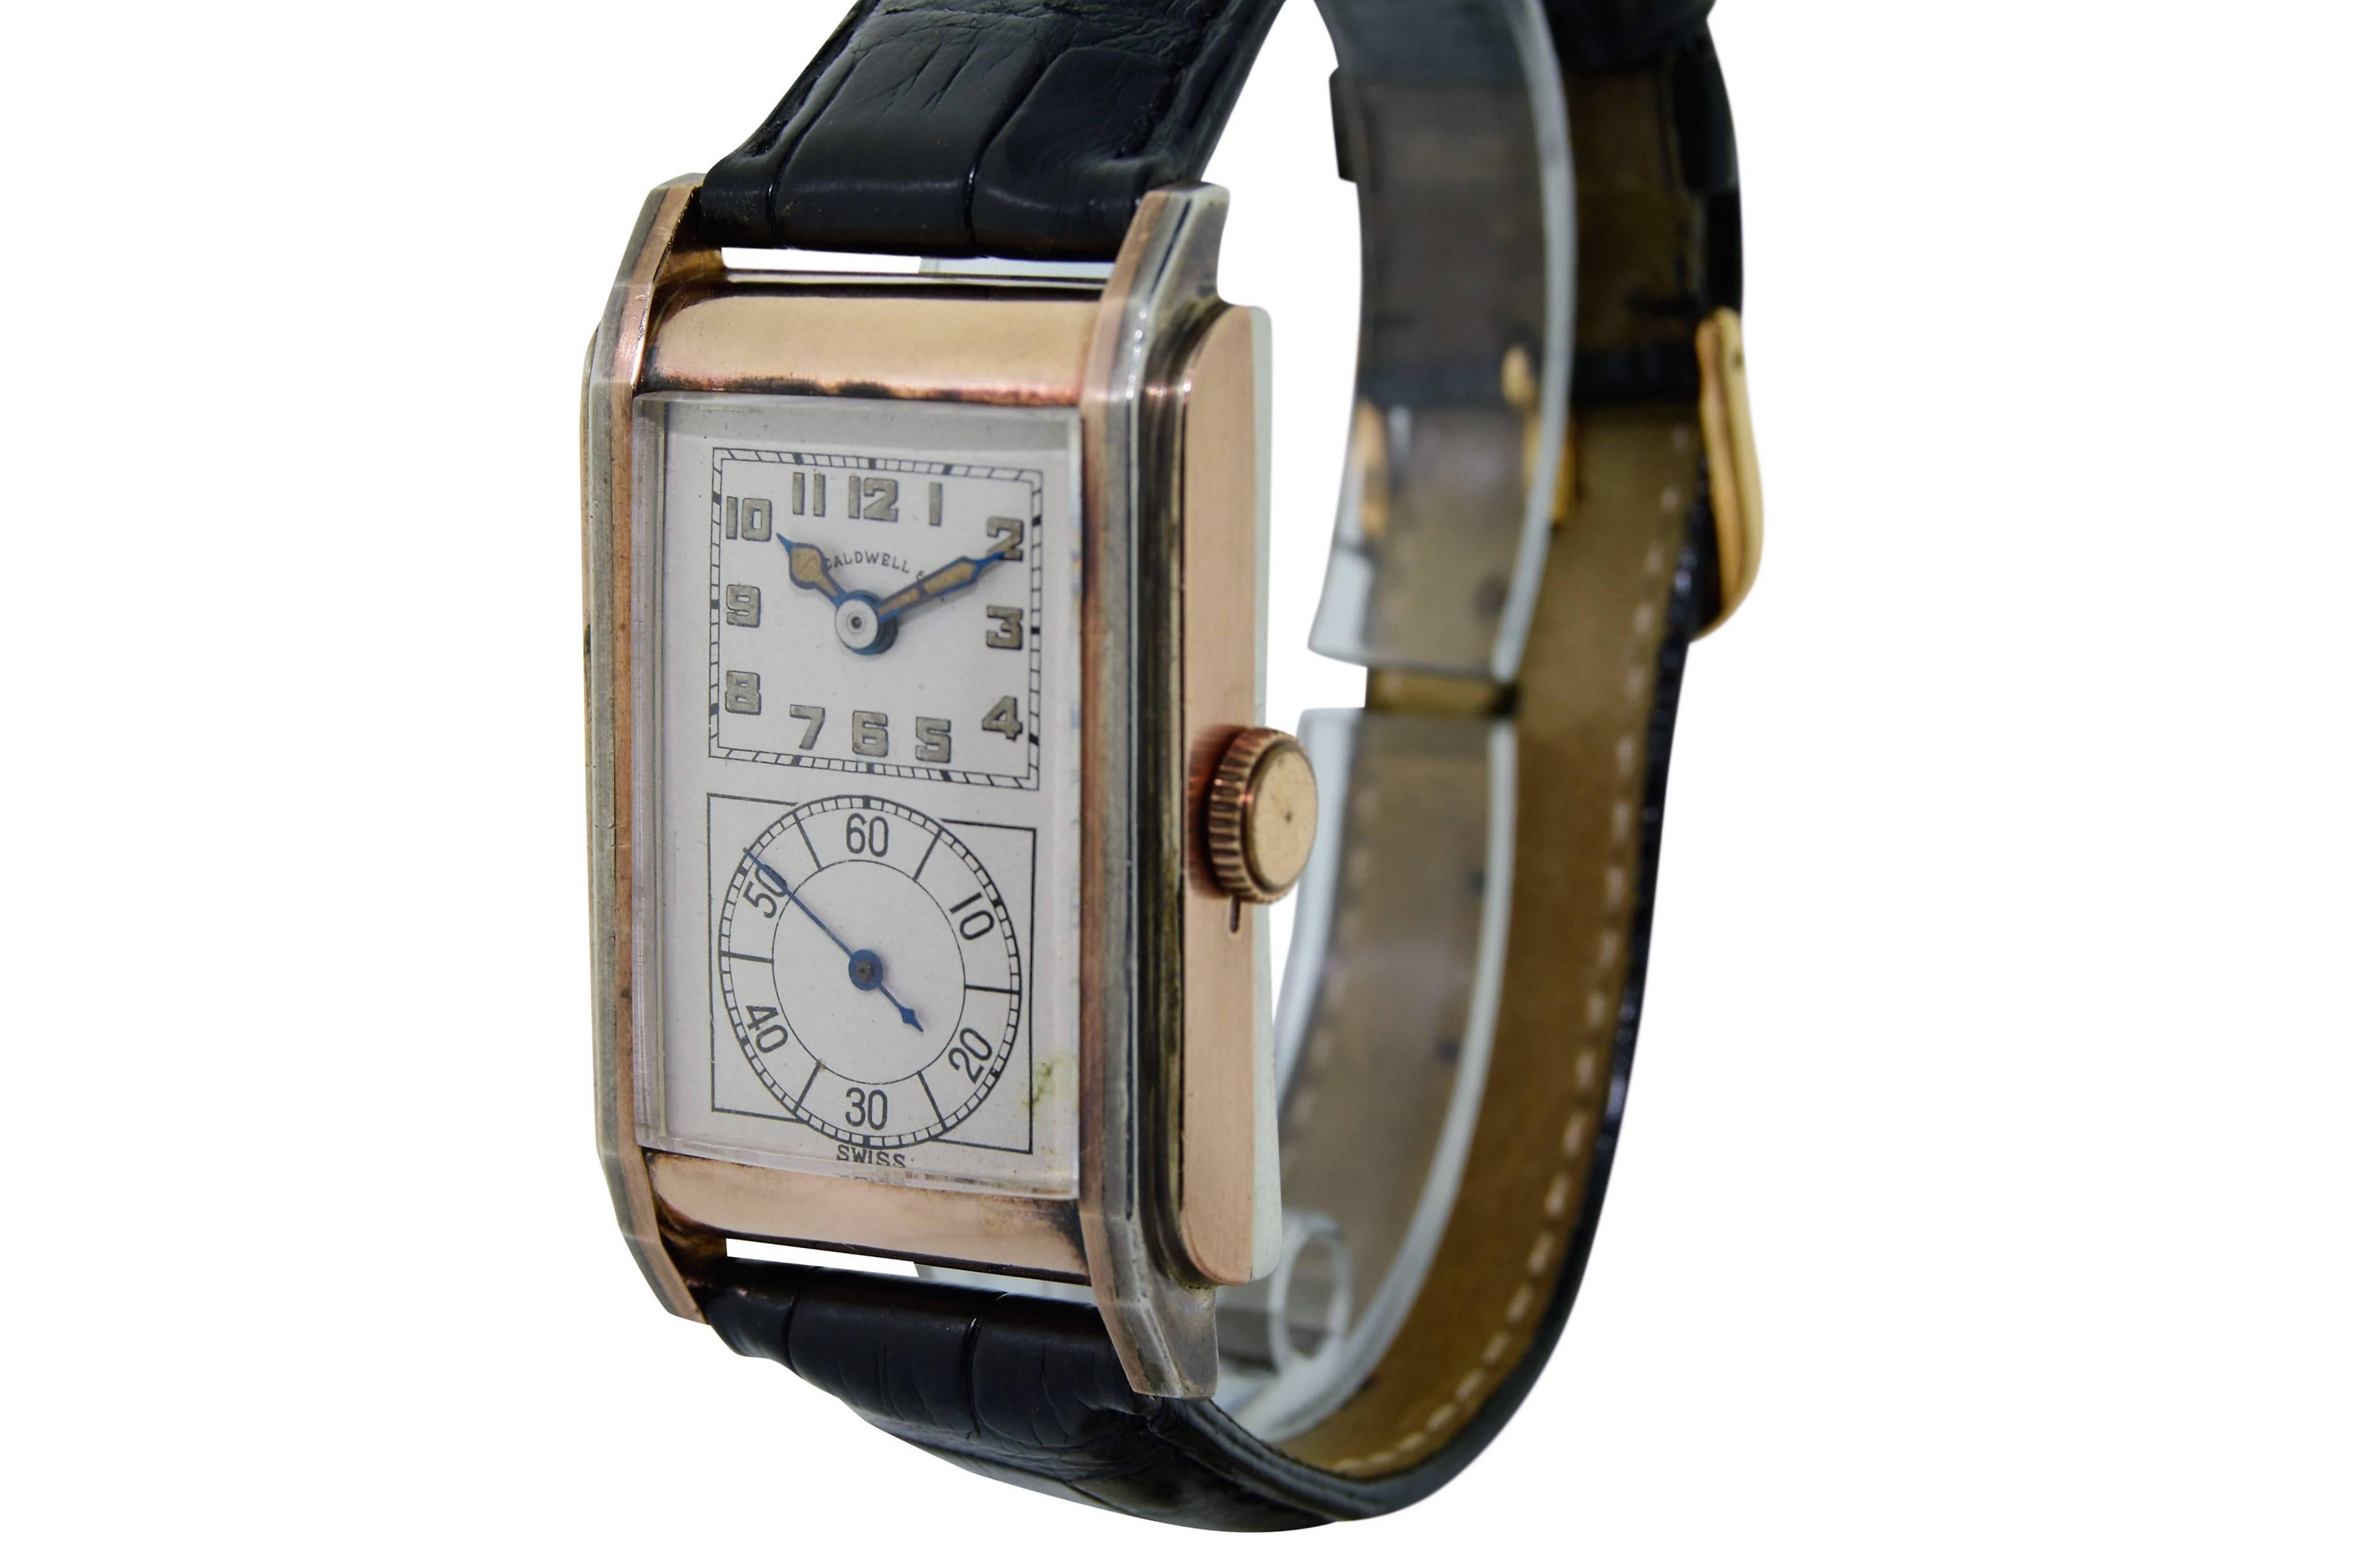 FACTORY / HOUSE: J.E. Cardwell
STYLE / REFERENCE: Drs. Double Dial 
METAL / MATERIAL: Silver and Rose Gold
DIMENSIONS:  45mm X 27mm
CIRCA: 1930's
MOVEMENT / CALIBER: Manual Winding / 15 Jewels
DIAL / HANDS: Luminous Arabic Numbers / Blued Steel